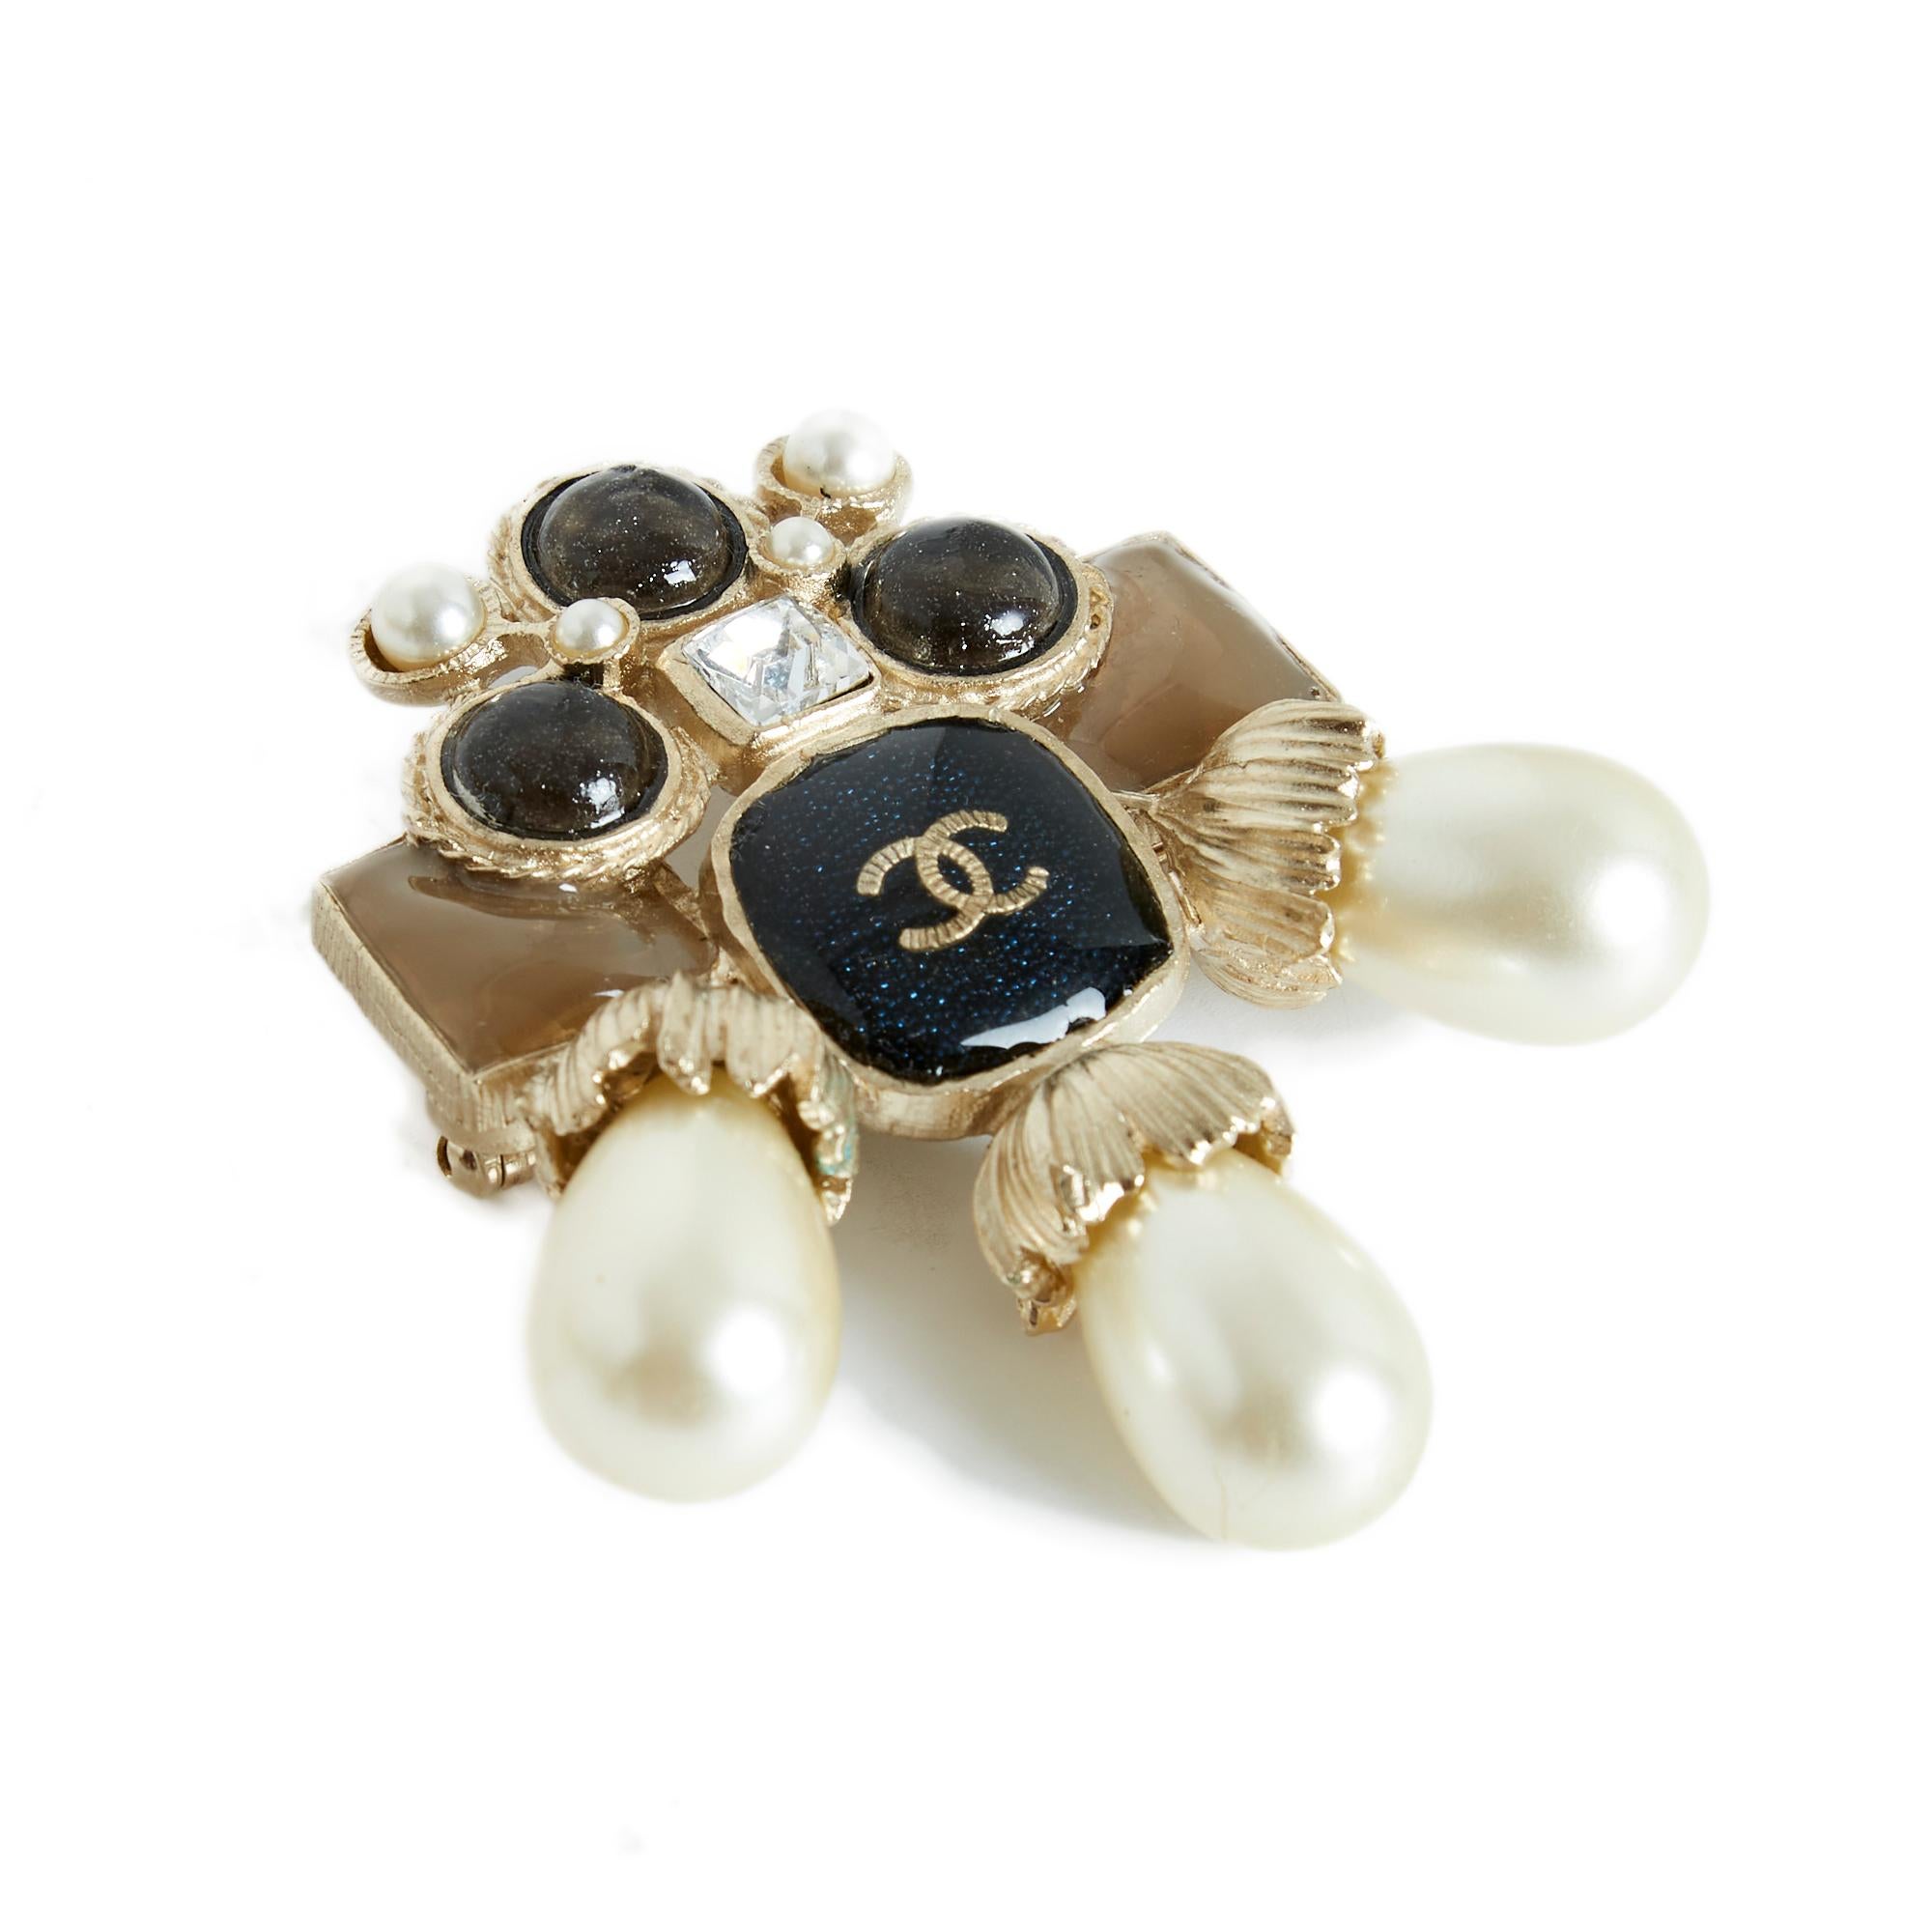 Chanel brooch AW2016 collection in lightly gilded metal (between gold and silver), XL format, central cabochon covered with slightly glittery black enamel and inlaid with a CC logo, cabochons of different shapes and slightly glittery colors, fancy